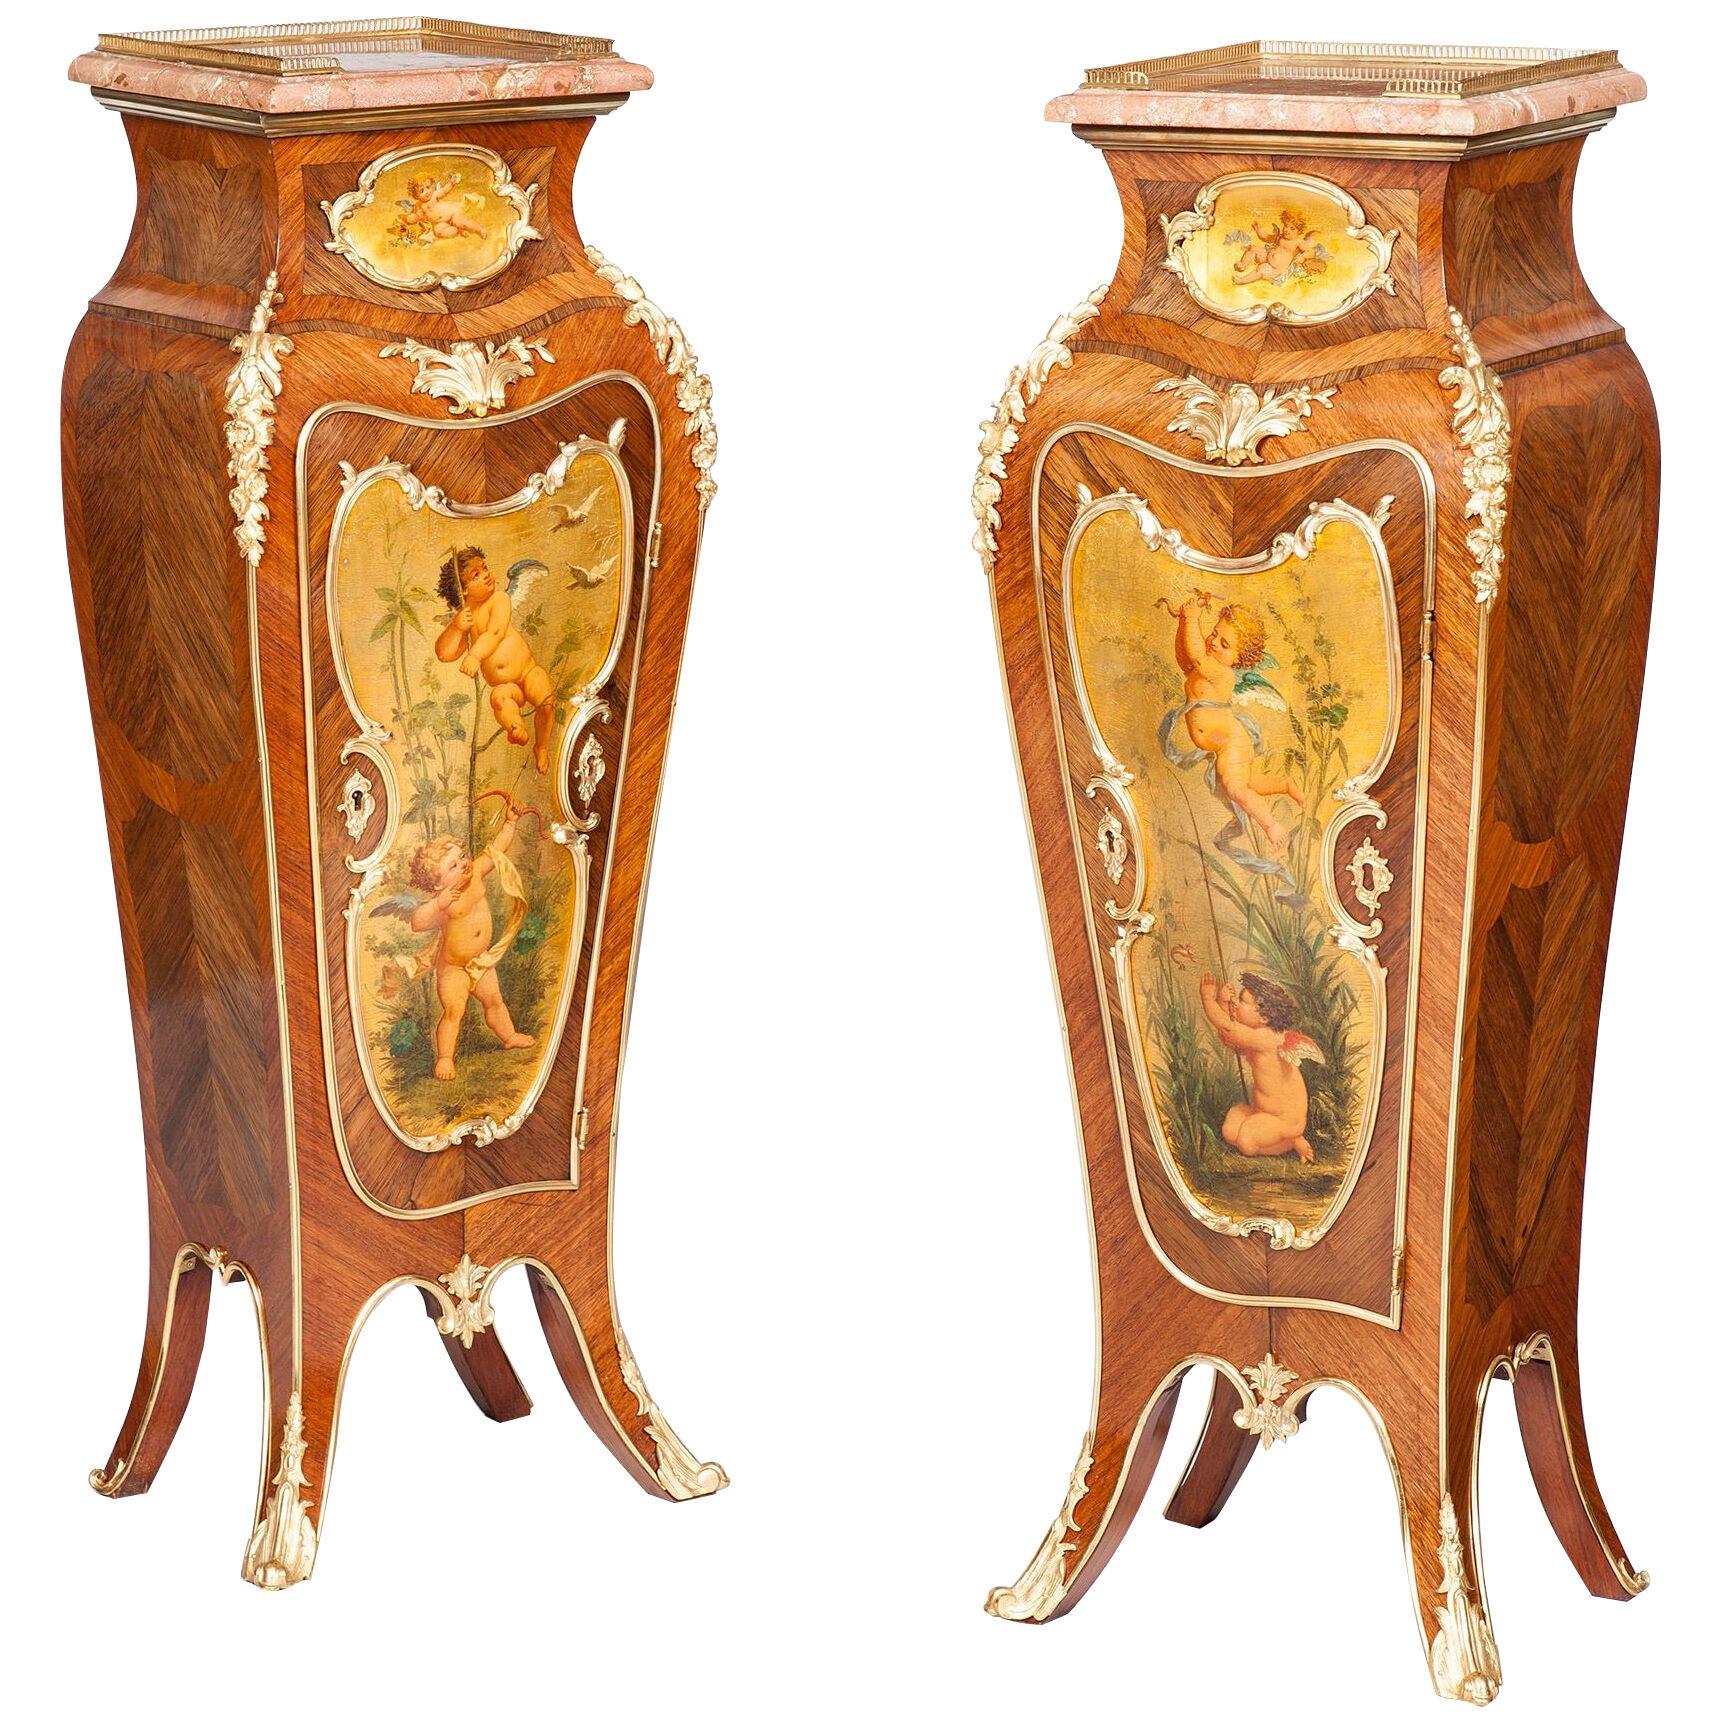 Pair of 19th Century Pedestal Cabinets in the Louis XV Manner